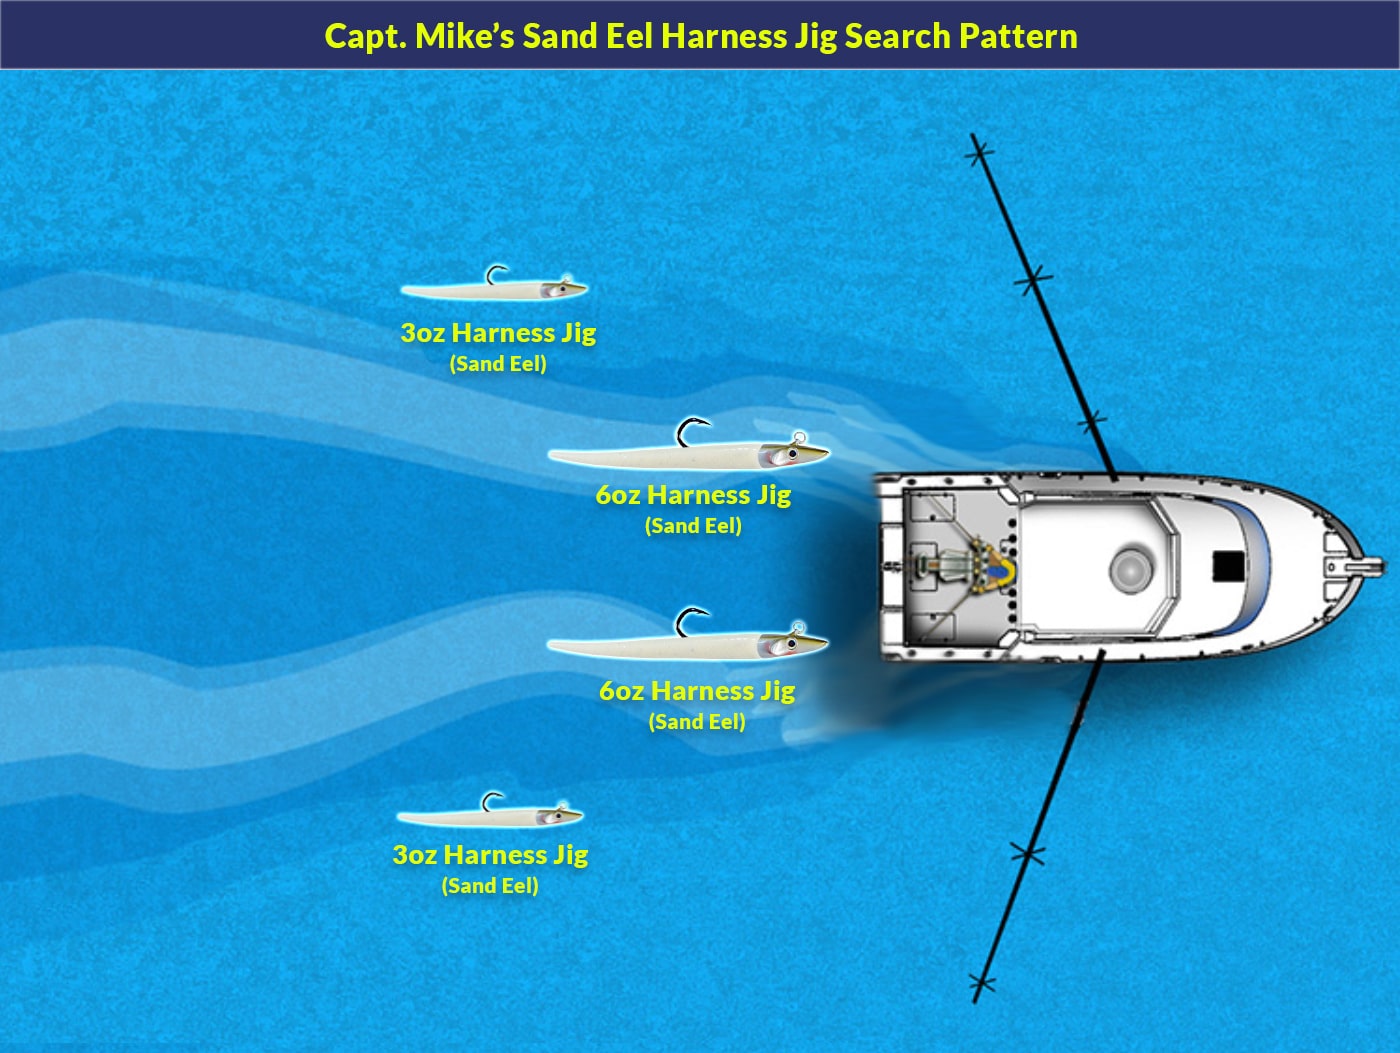 Capt. Mike's Sand Eel Search Pattern